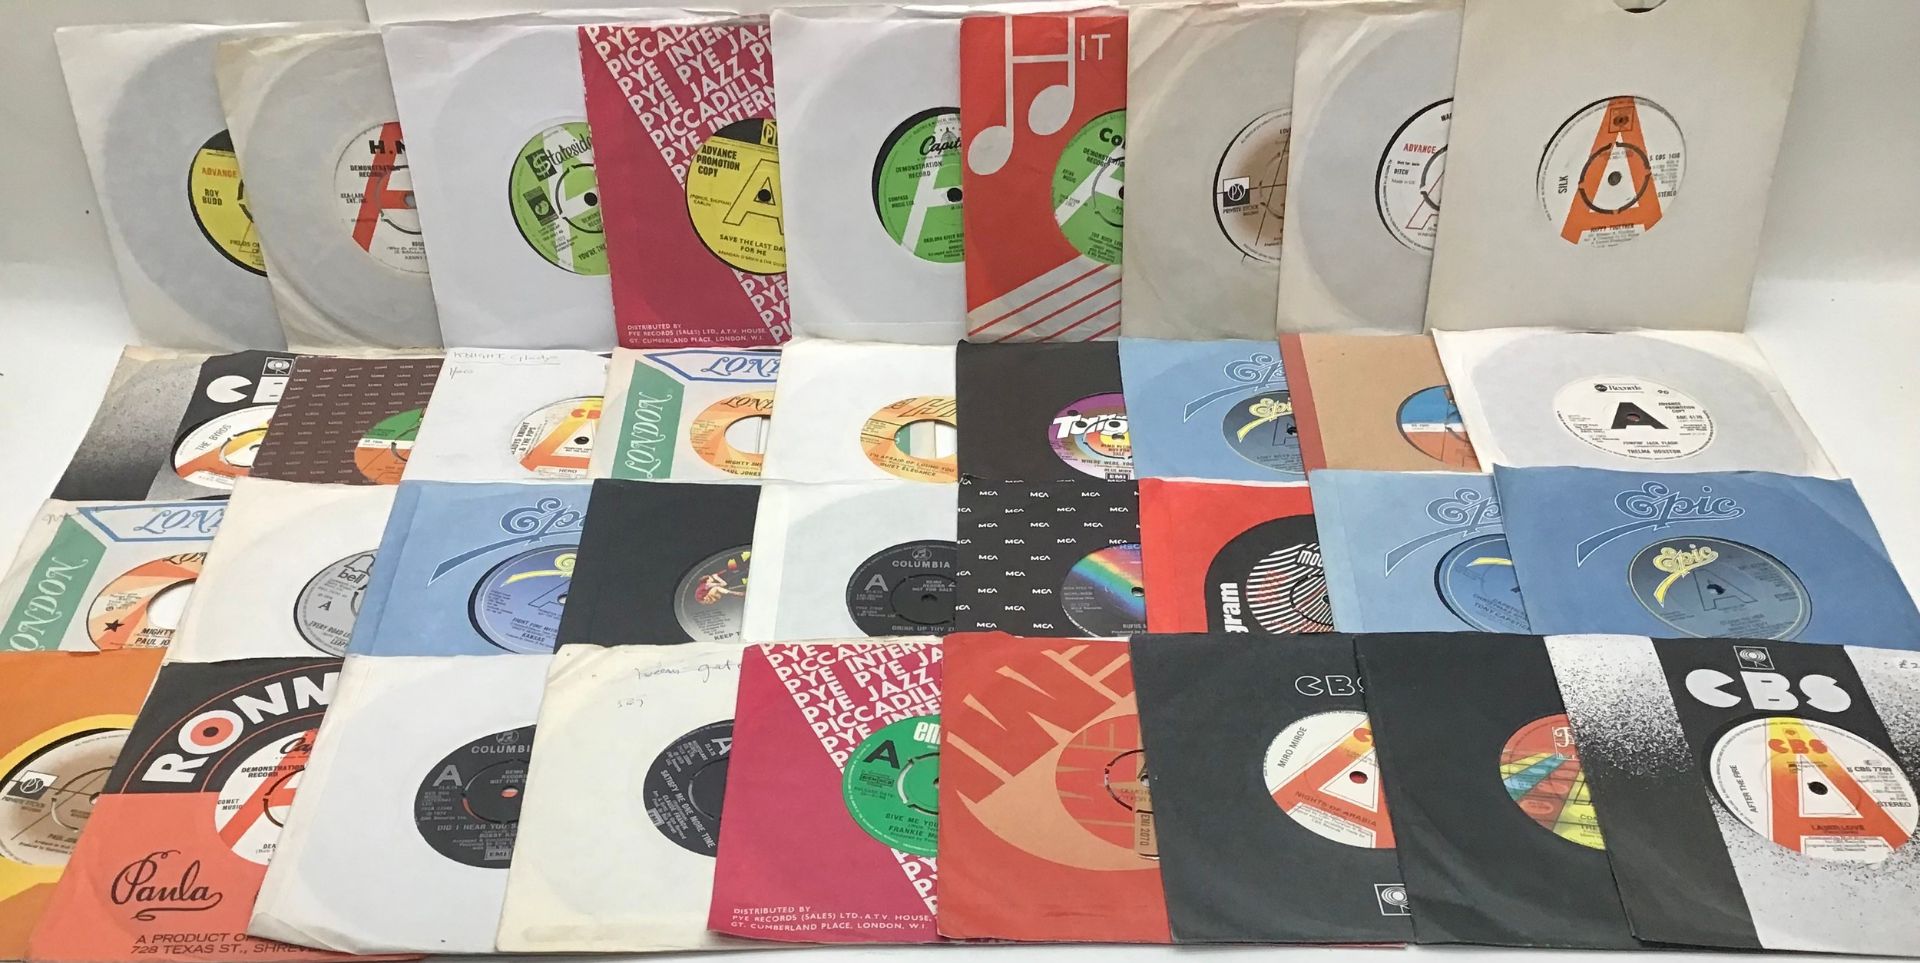 36 DEMO / PROMO 45 RPM RECORDS. Variety of singles from the 60s 70s & 80s found here in mainly VG+